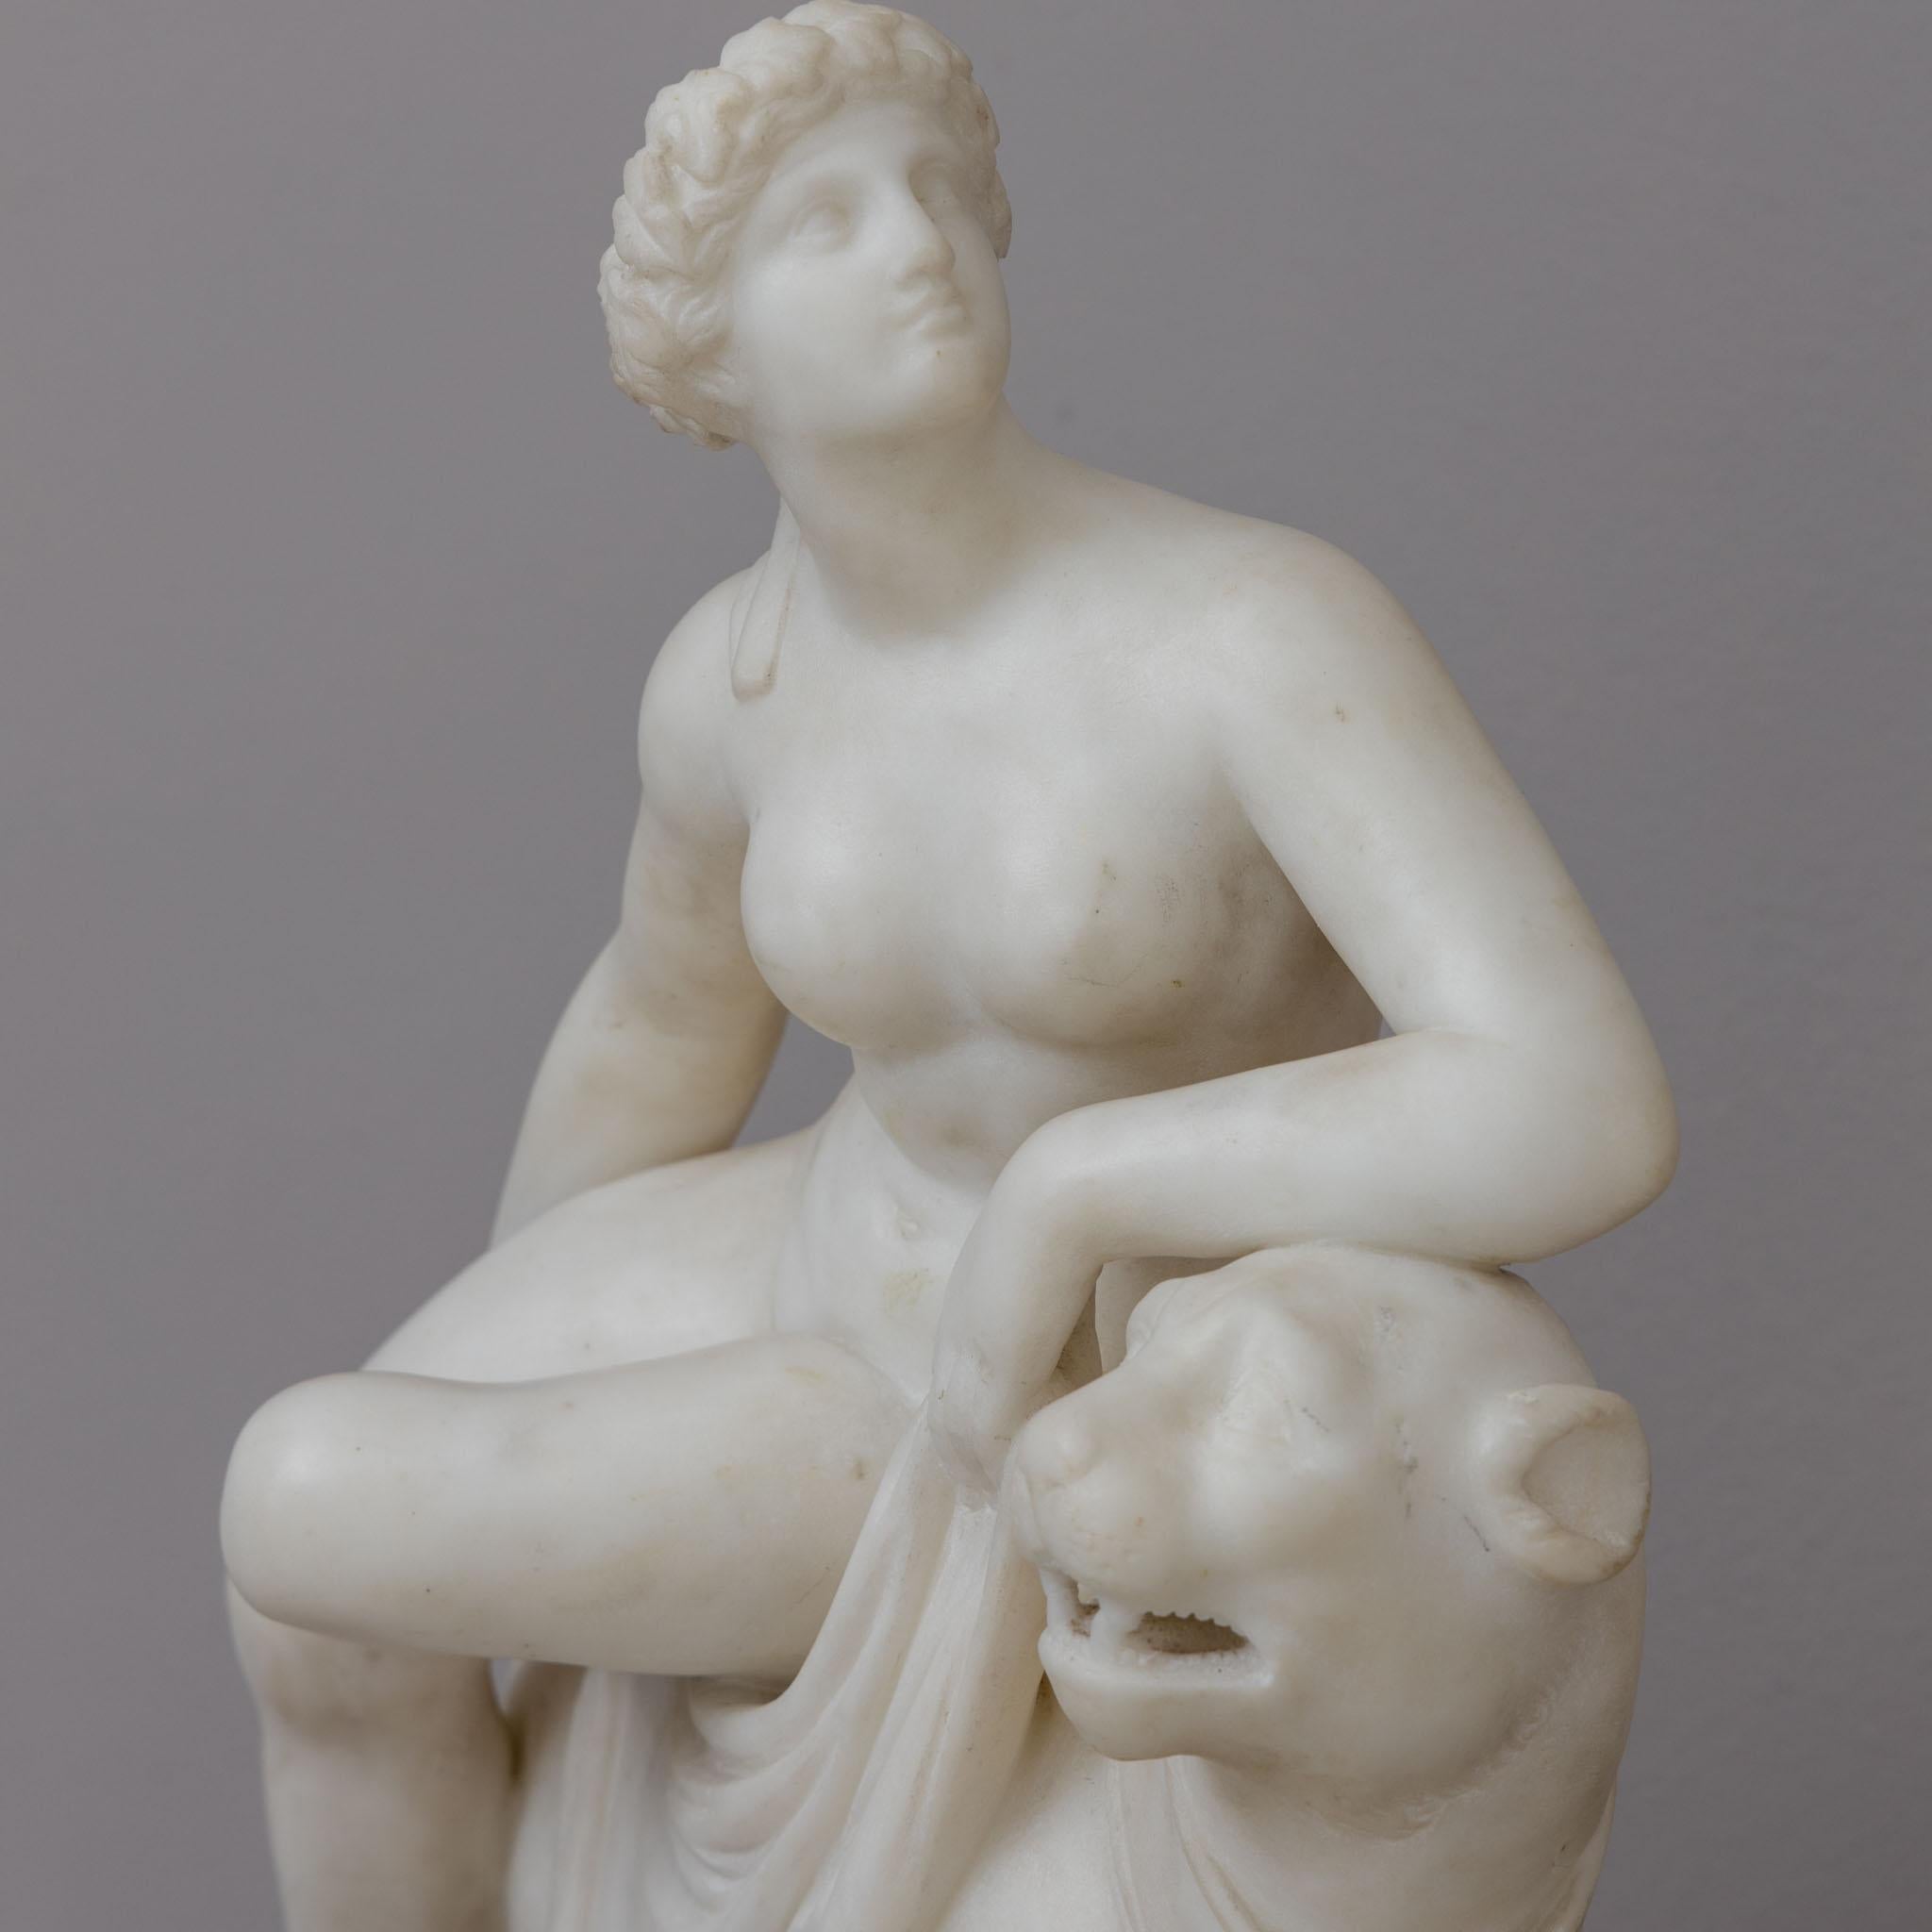 German Ariadne on the Panther, After Dannecker, 2nd Half 19th Century